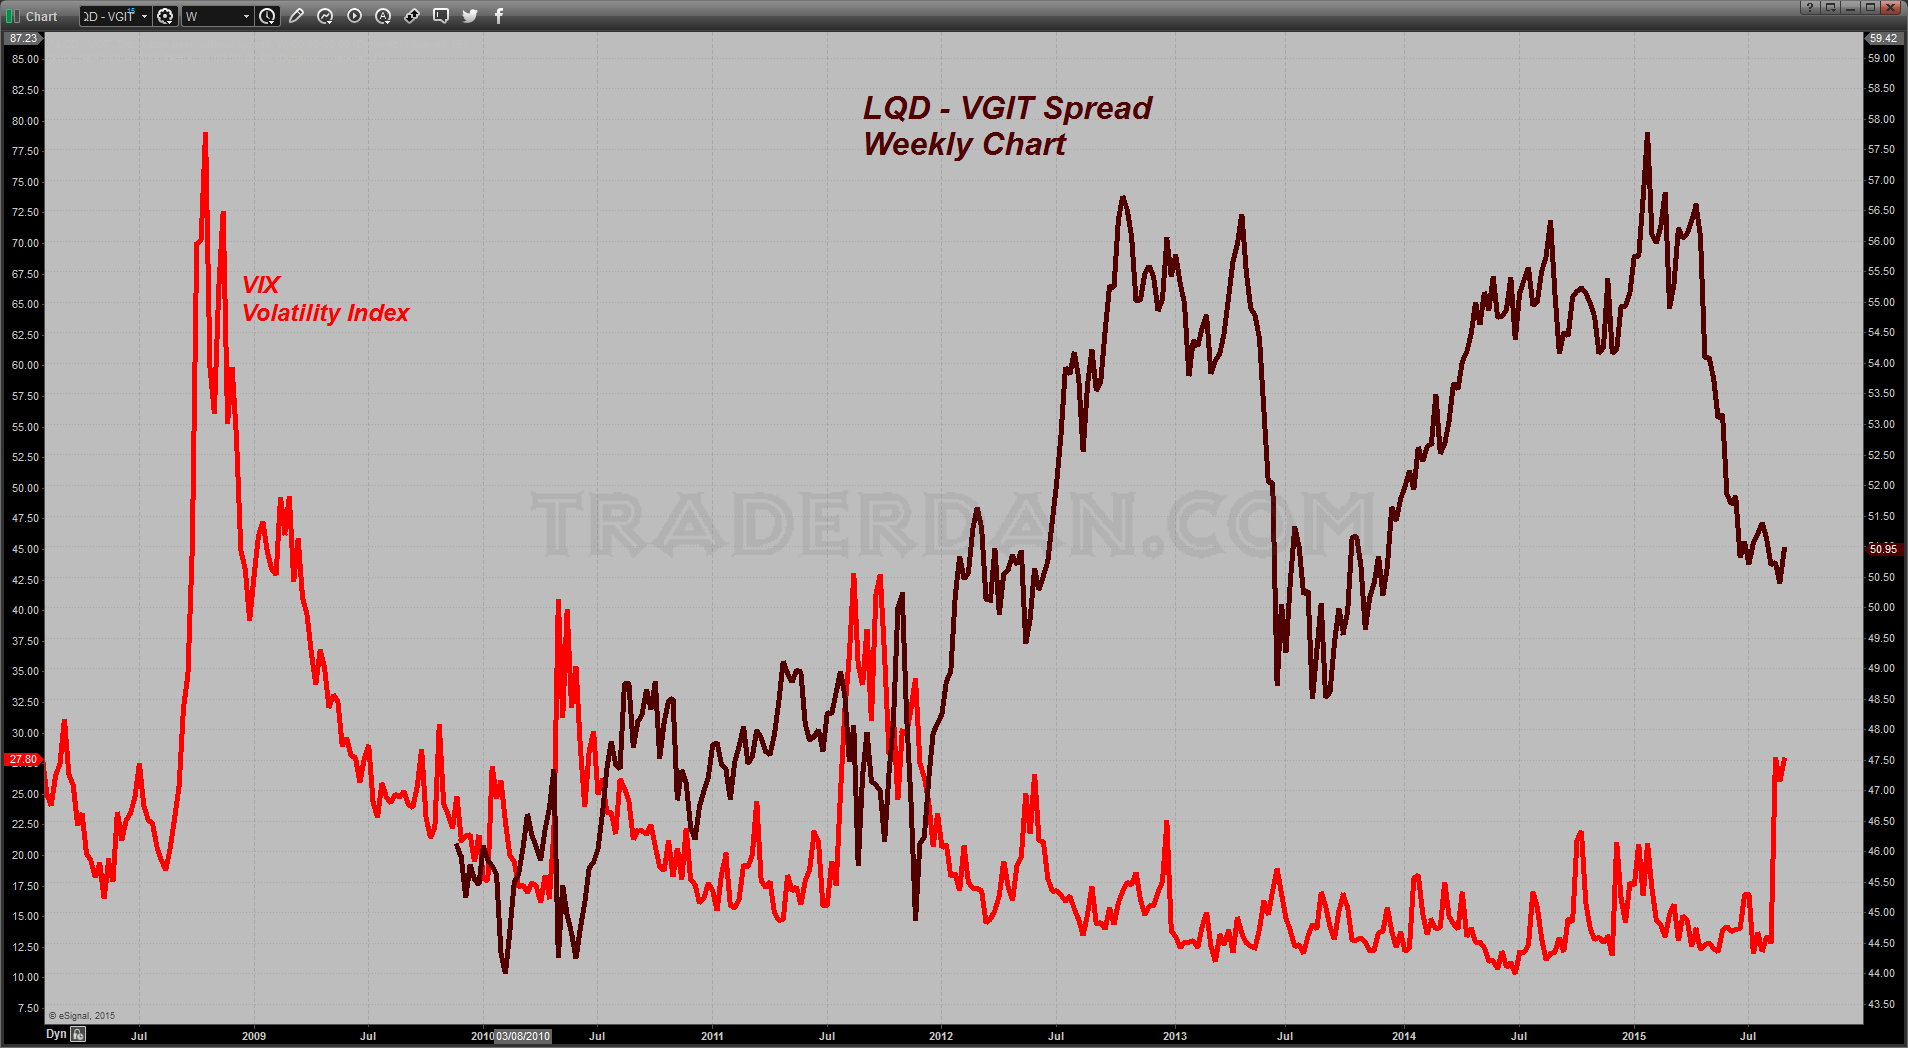 LQD:VGIT Weekly with VIX 2009-2015